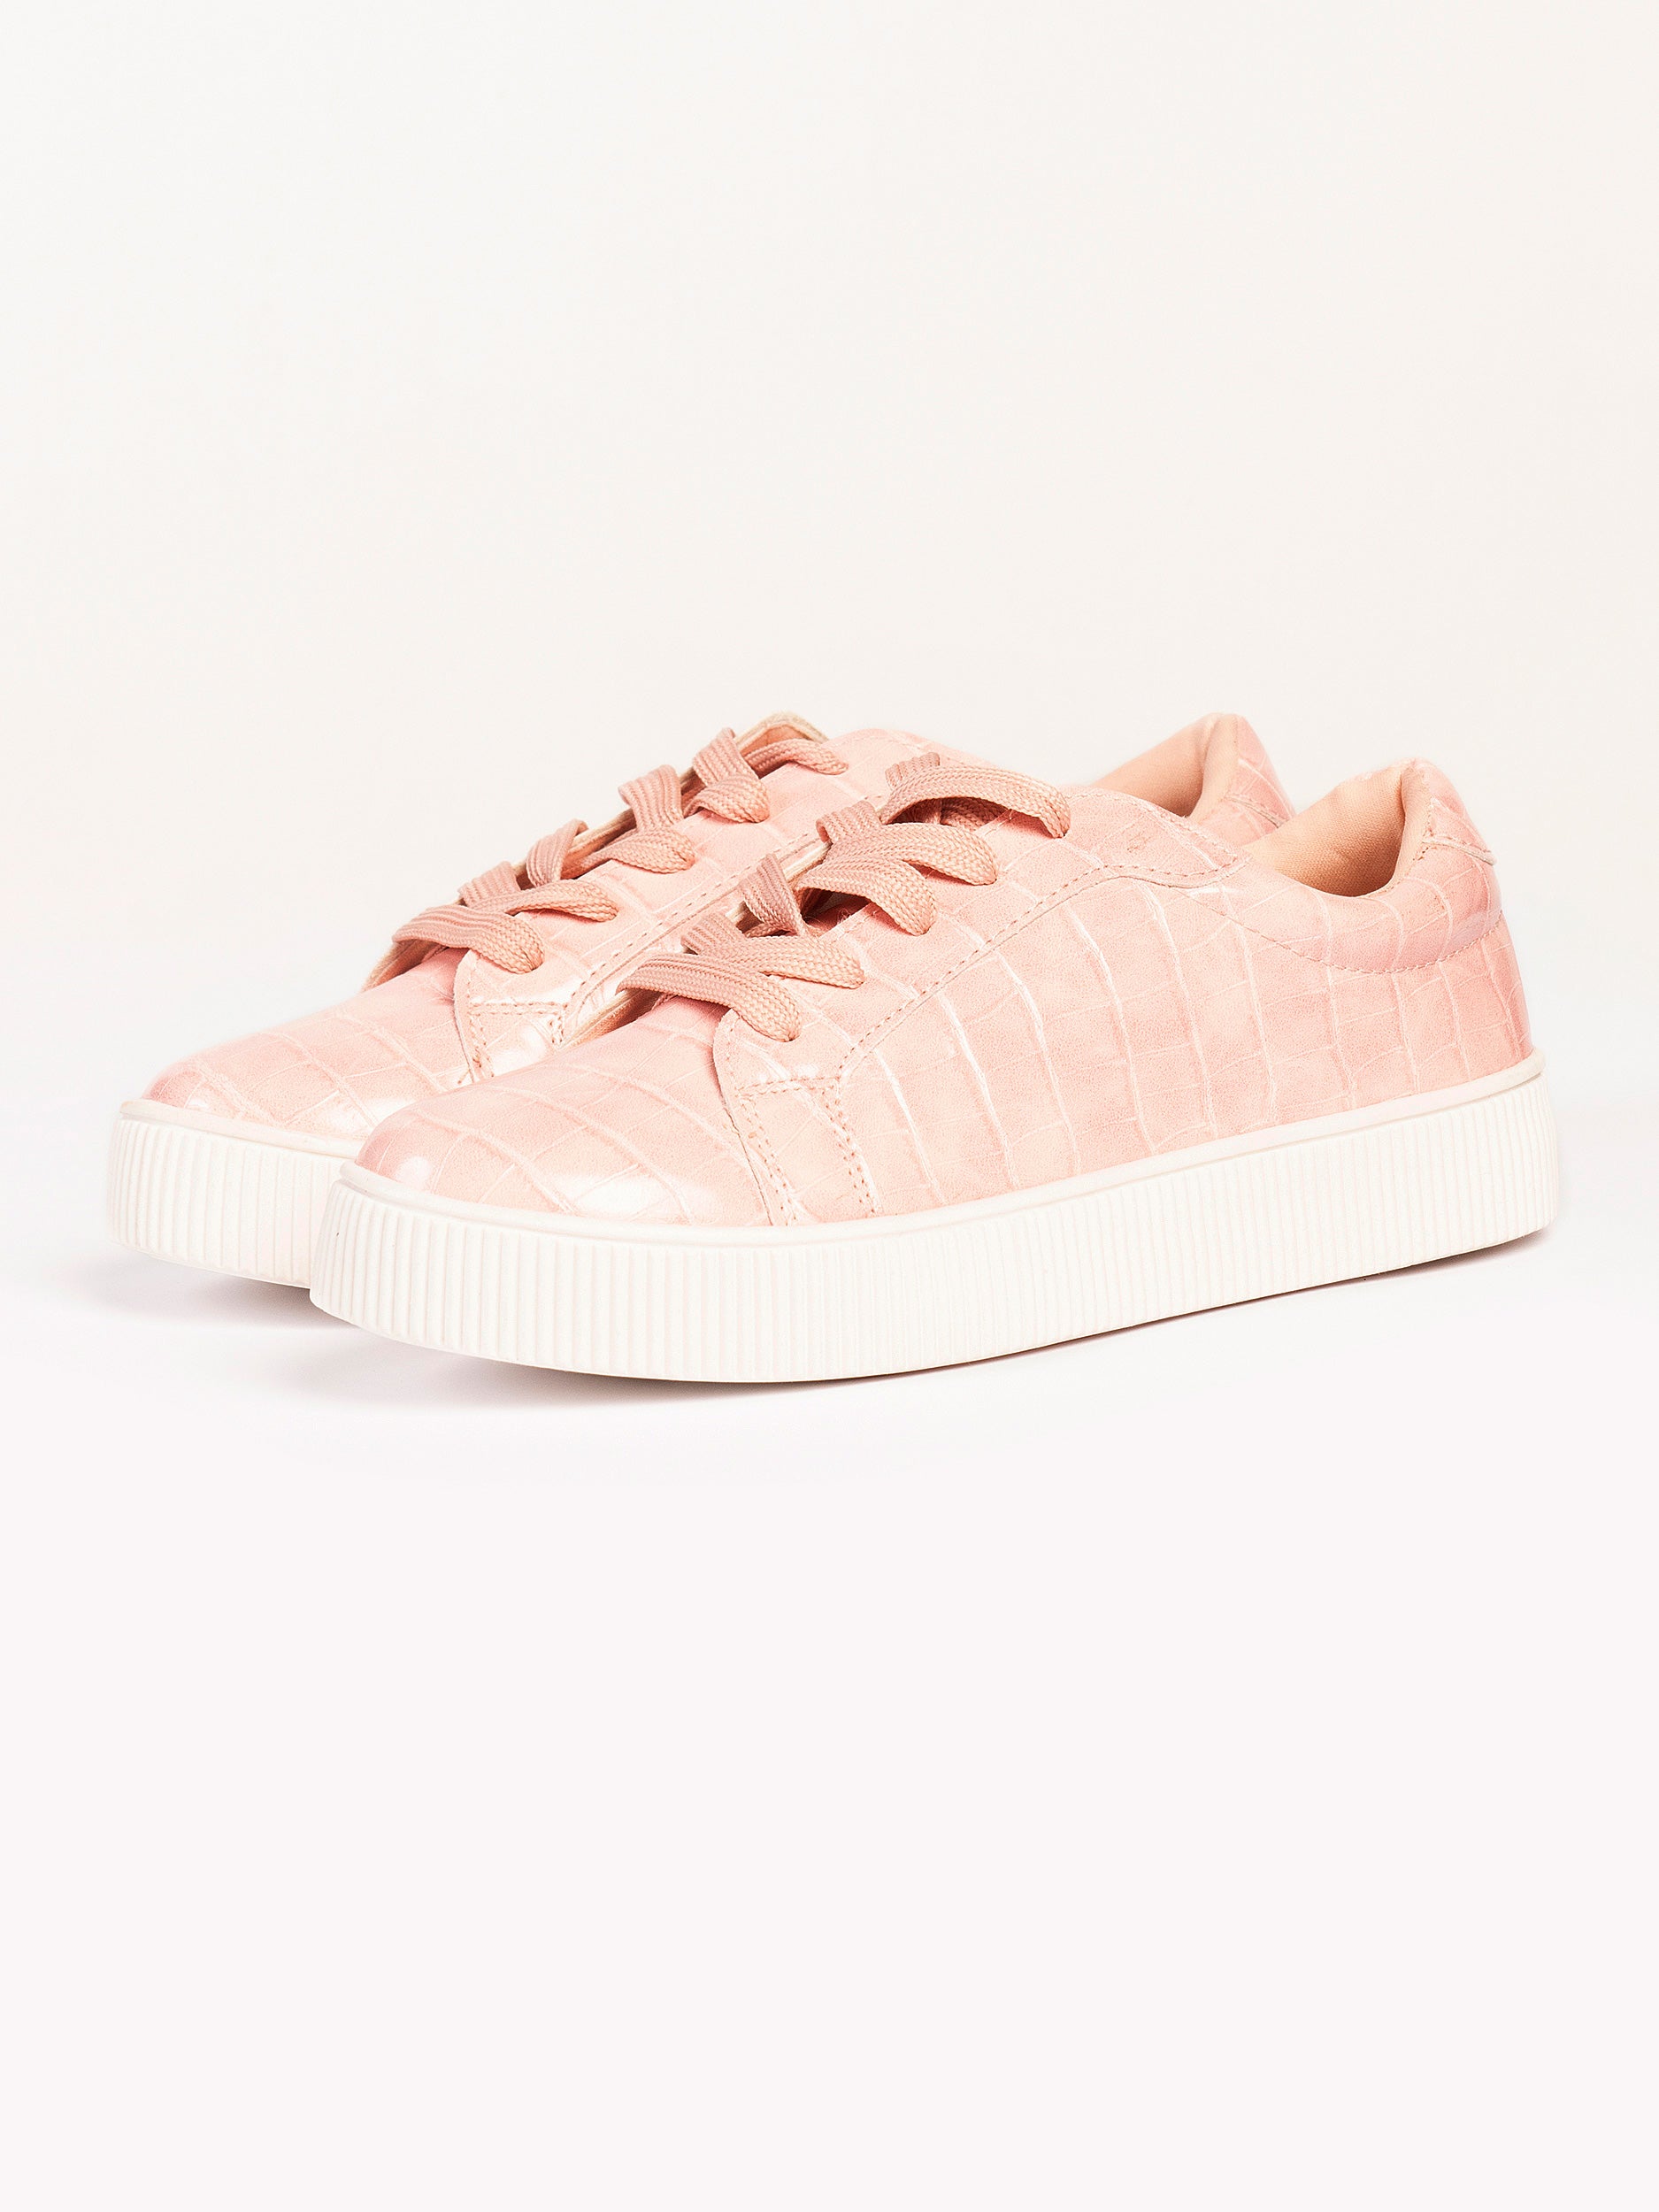 glossy-textured-sneakers